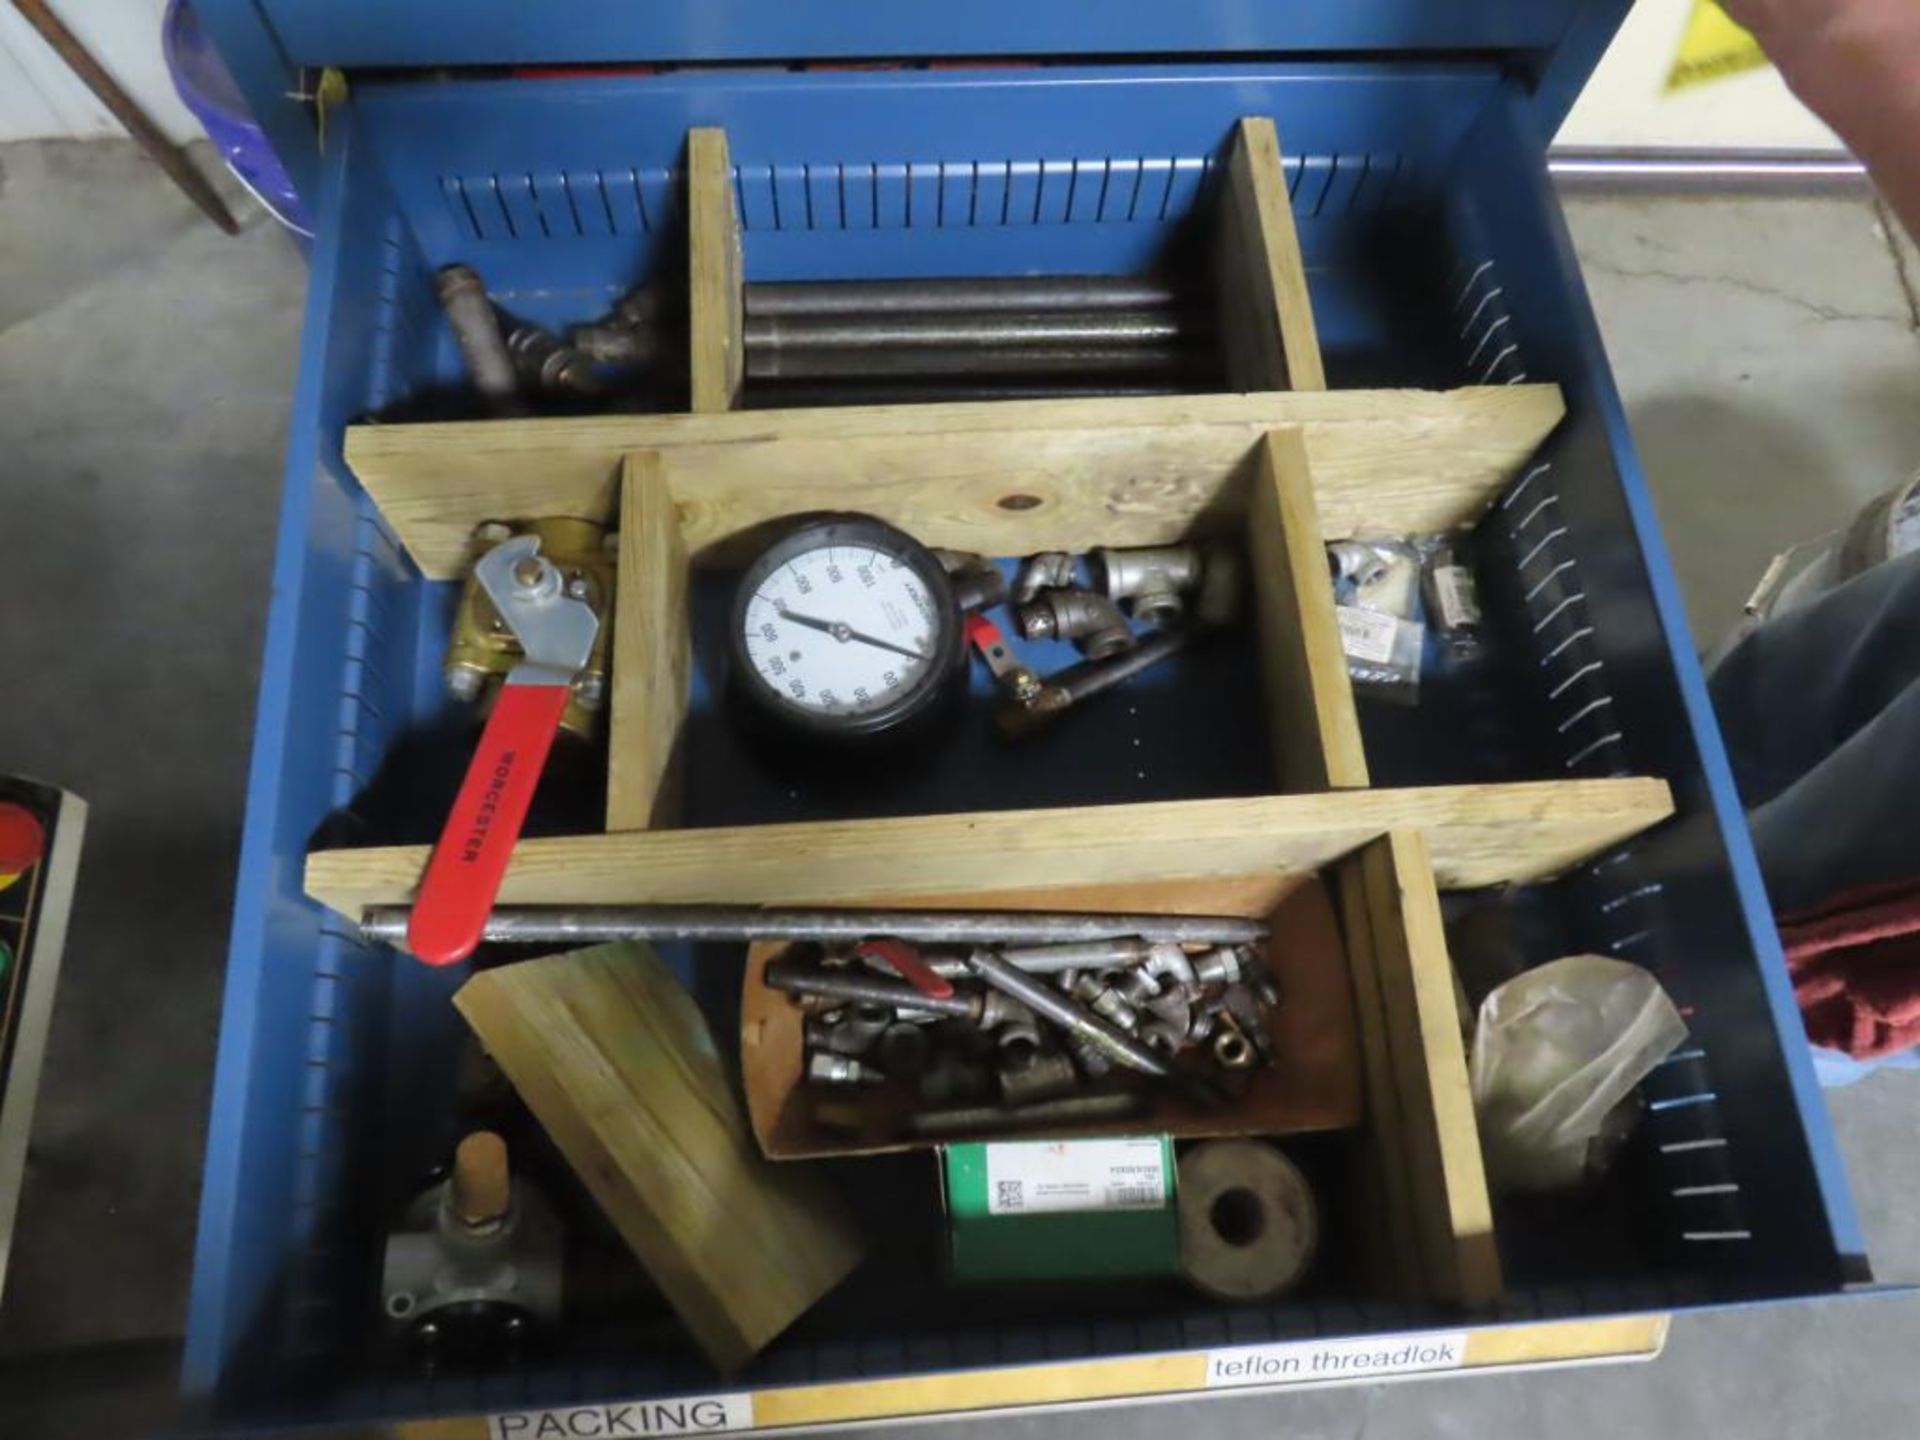 CONTENTS OF DRAWER - BALL VALVE, PRESSURE GAUGE & PIPE FITTINGS